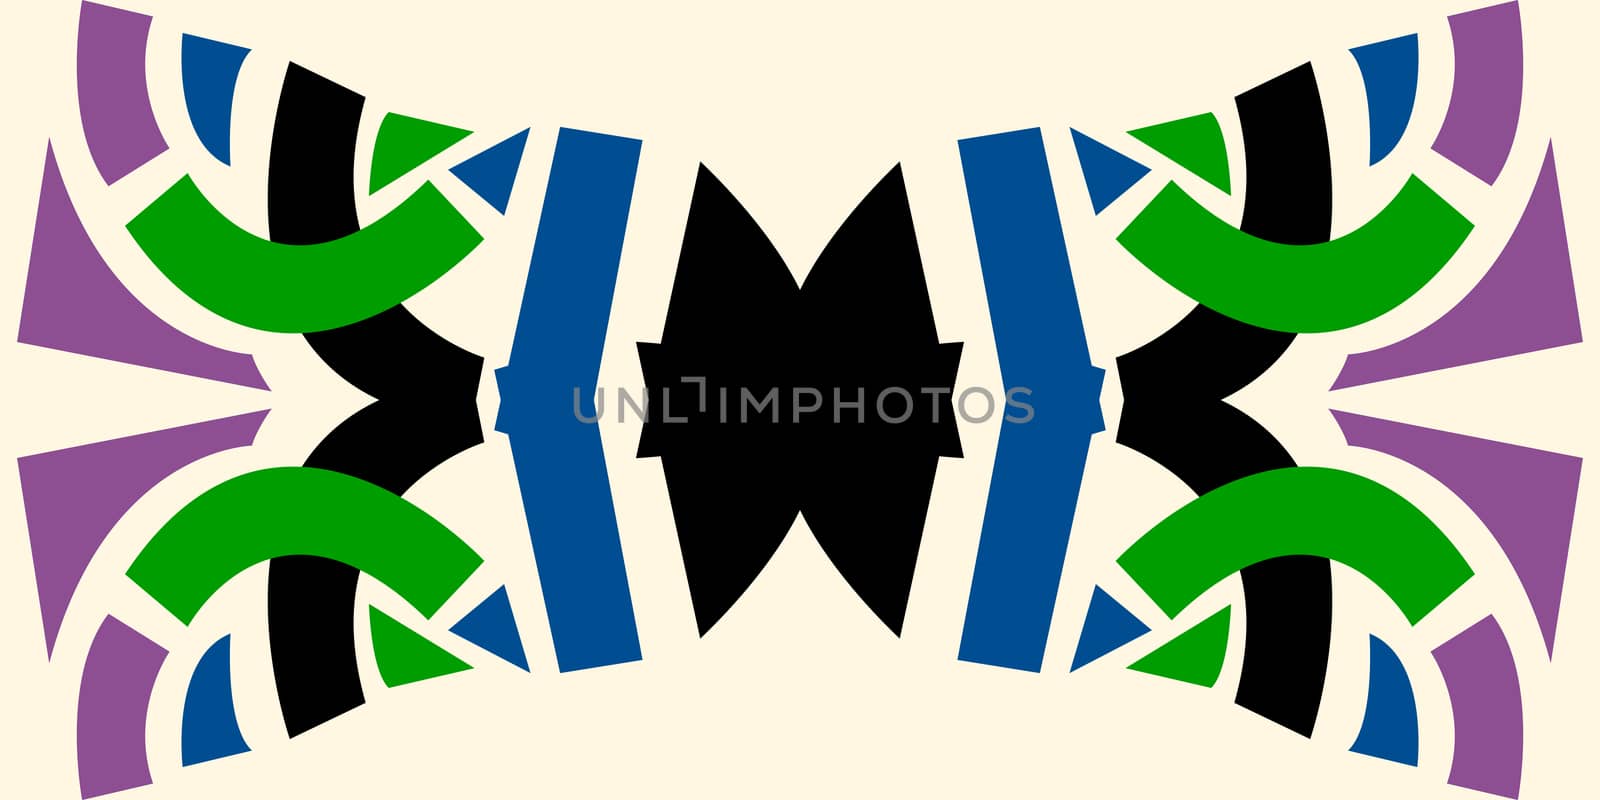 Abstract bowtie shape pattern over white background